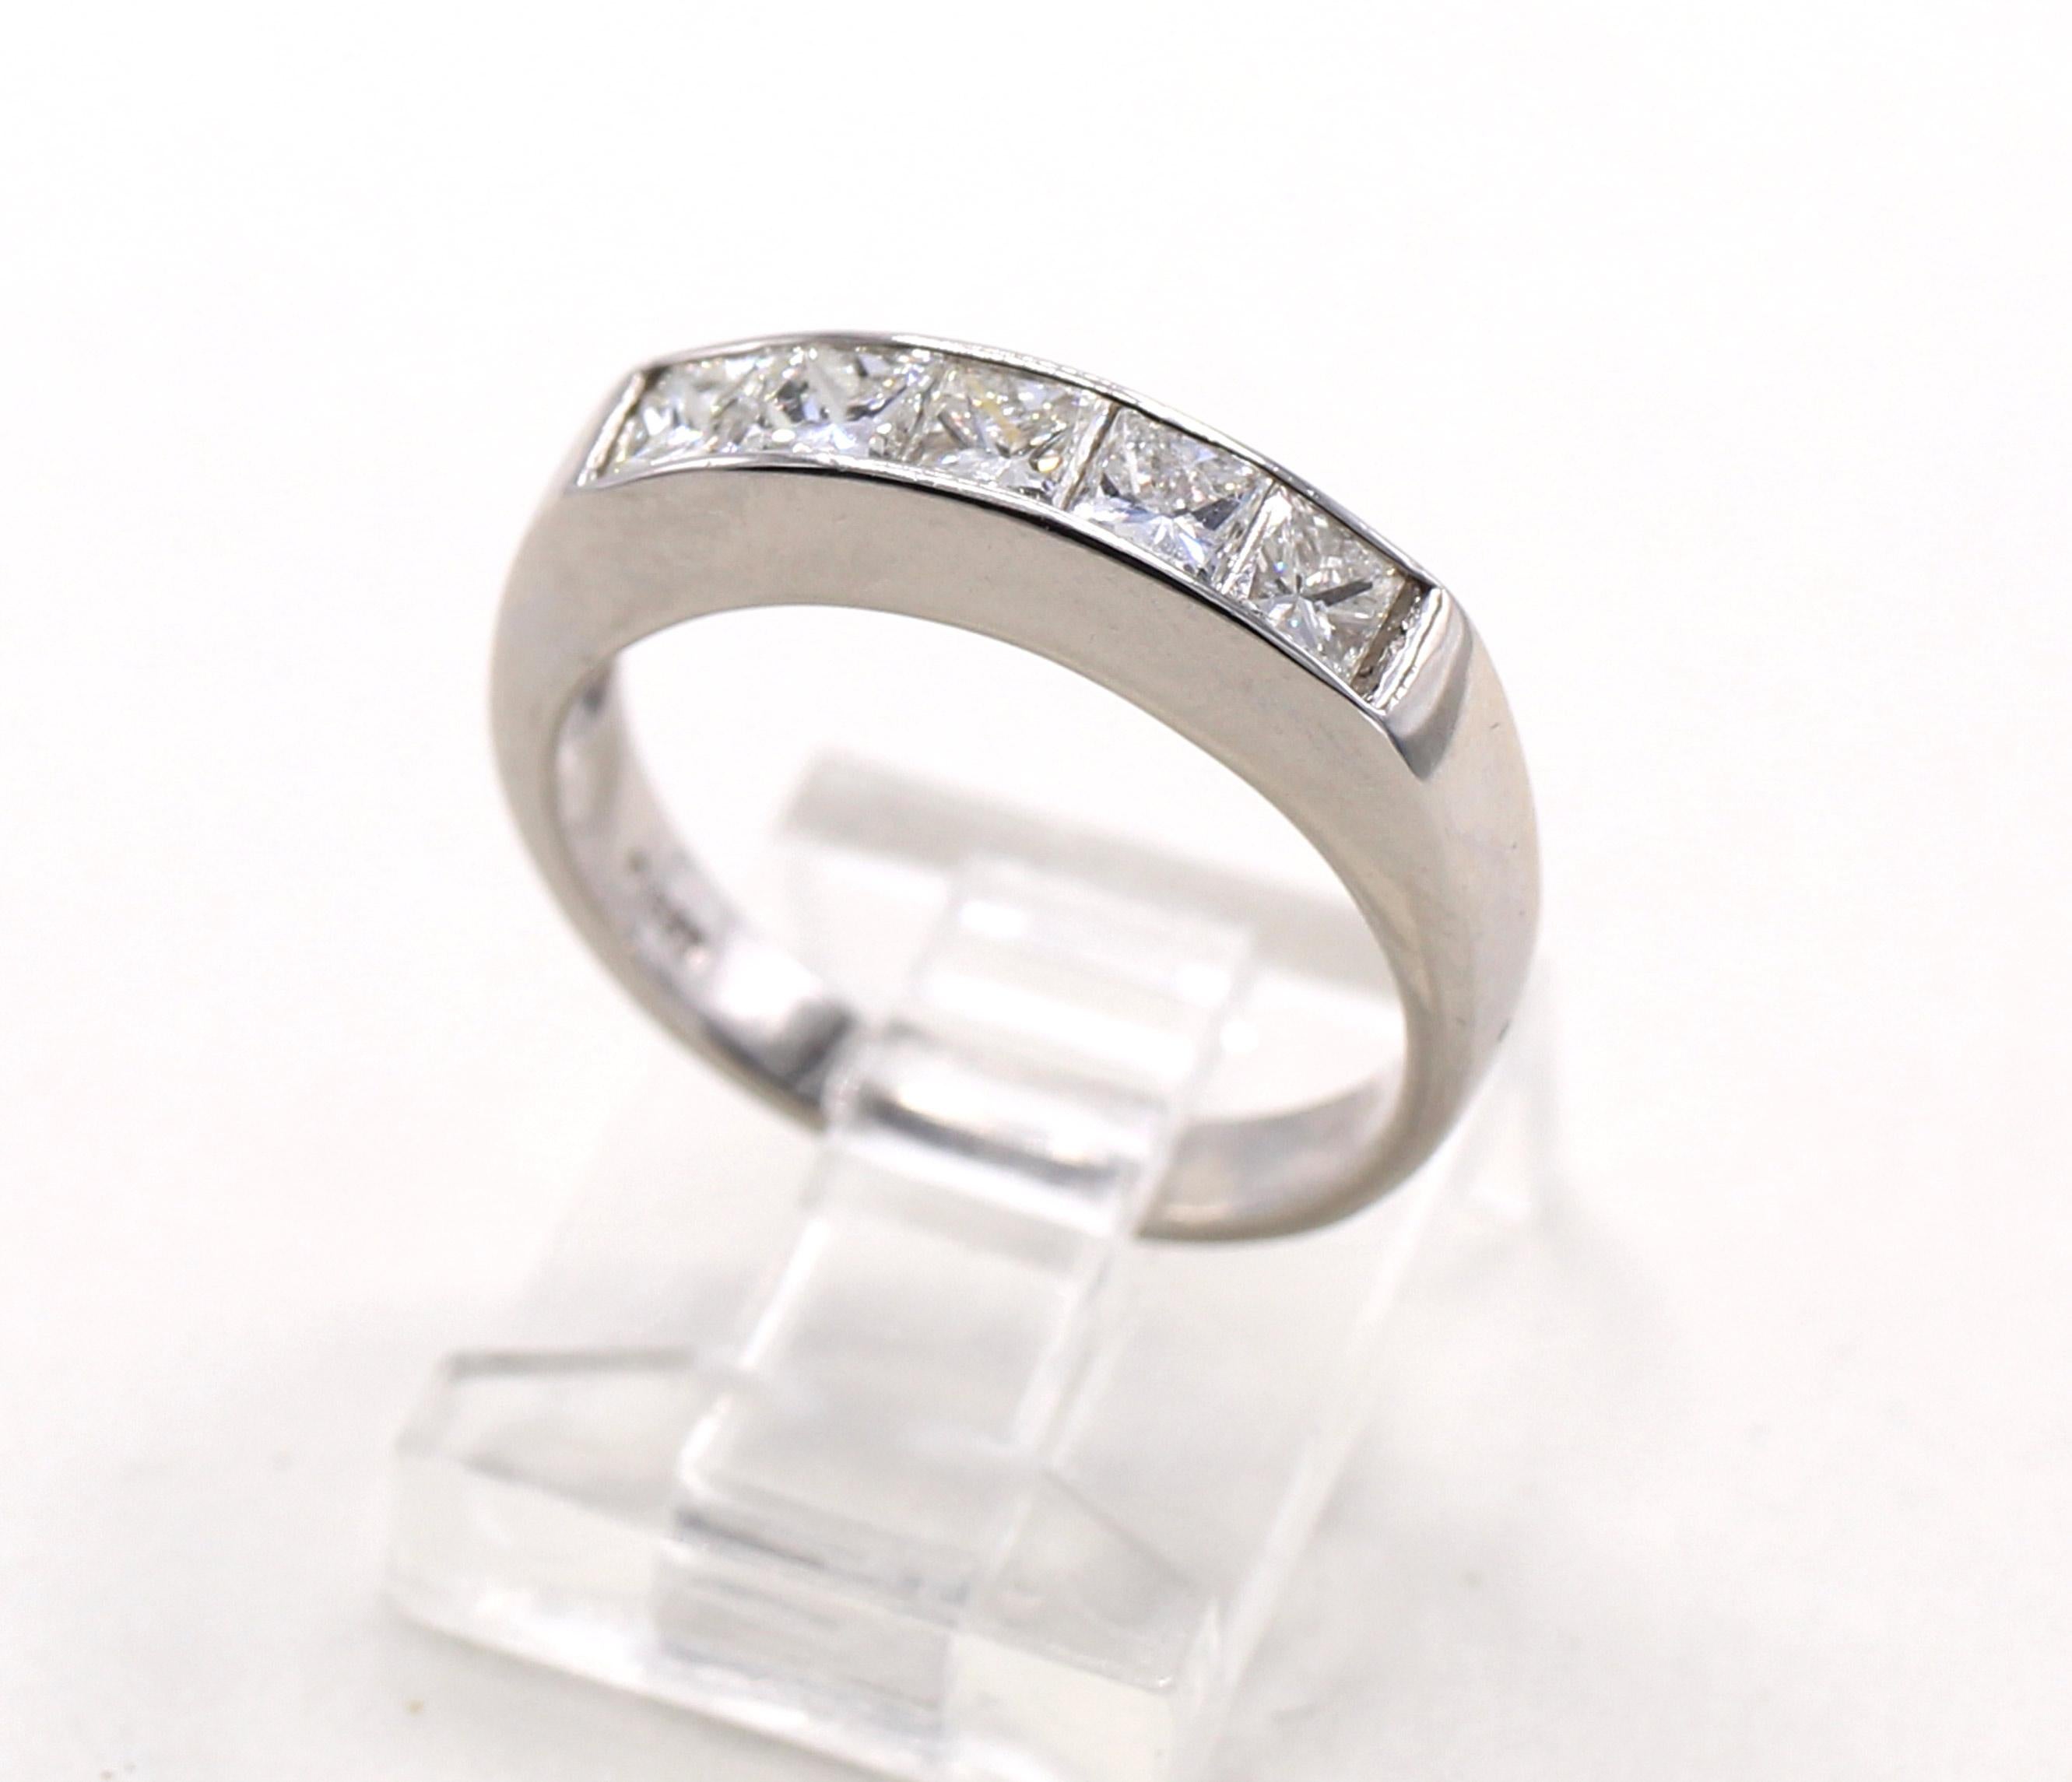 5 Princess cut diamonds with a total weight of 1.02 carats are channel set in a platinum handmade band. The average color and clarity of the diamonds is G/H VS. Size 6.5, can be sized